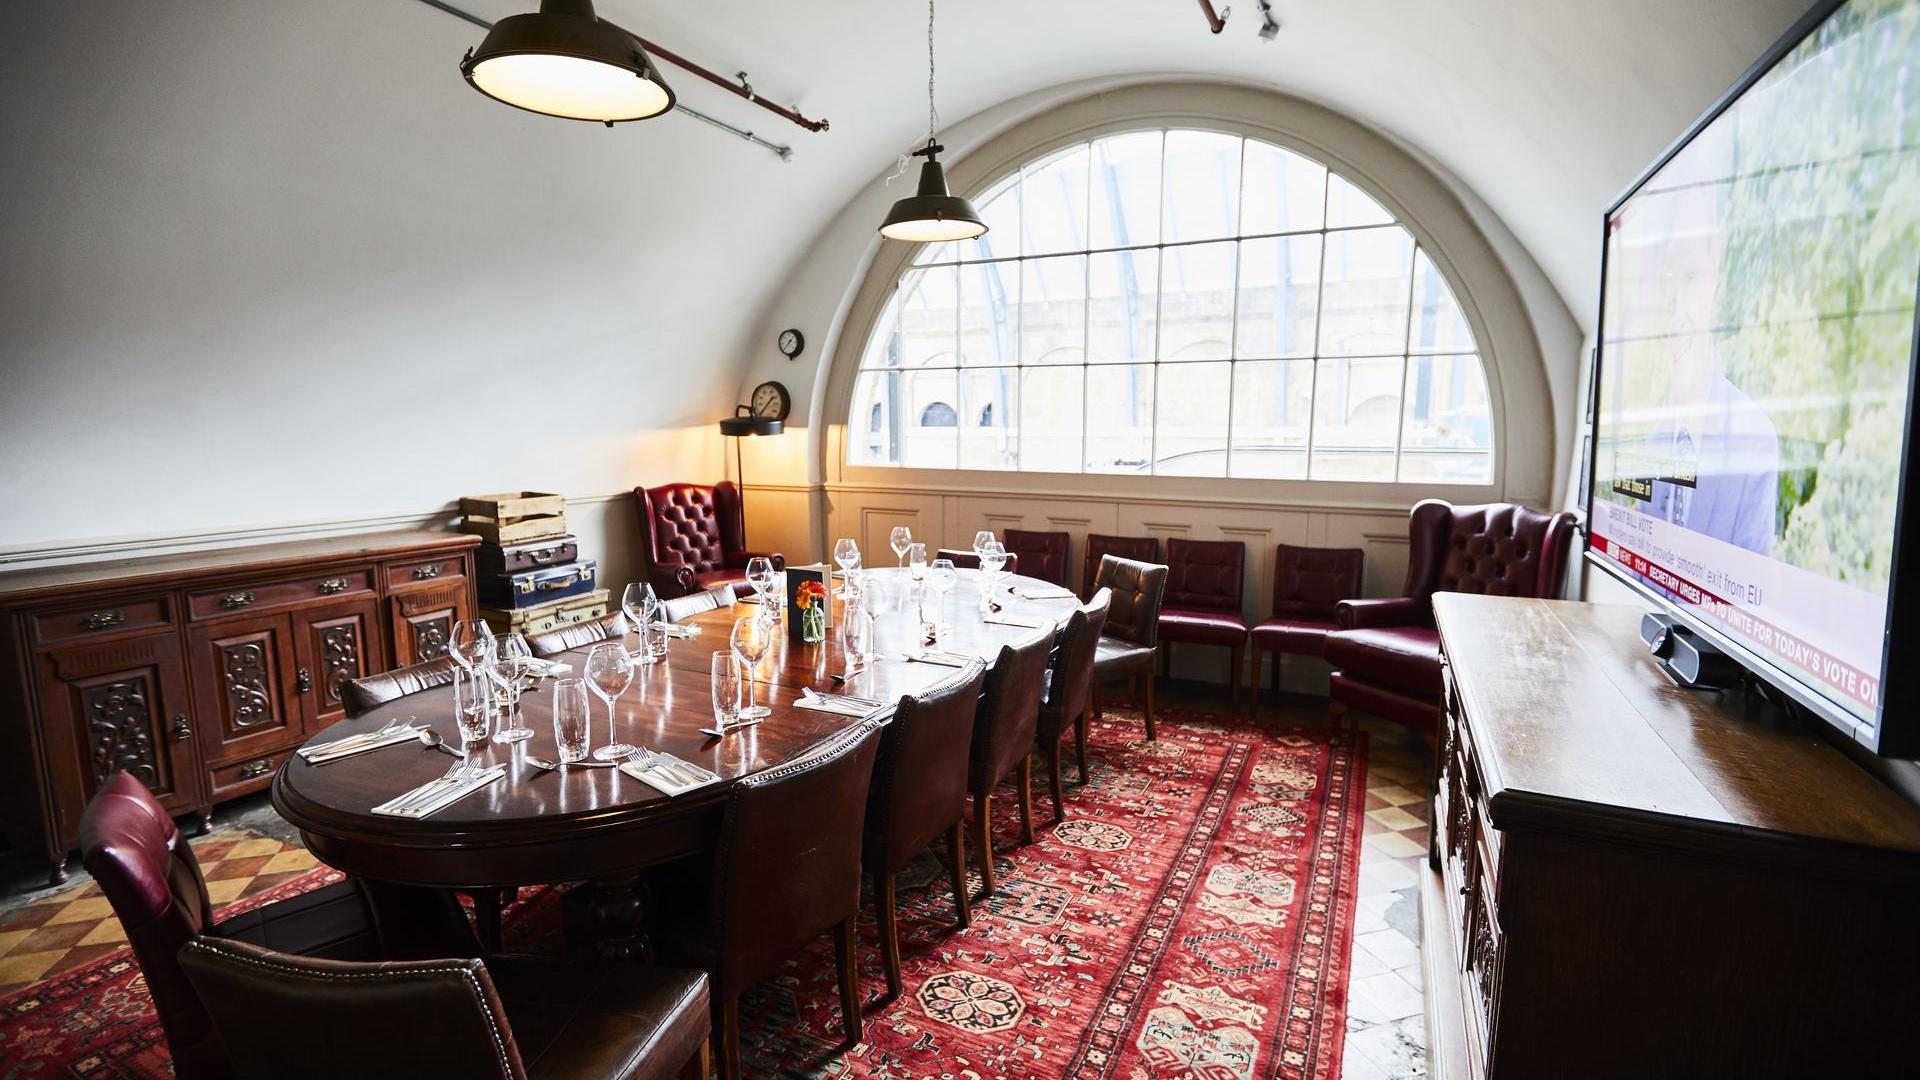 Find your Private Dining Room in Kings Cross, London